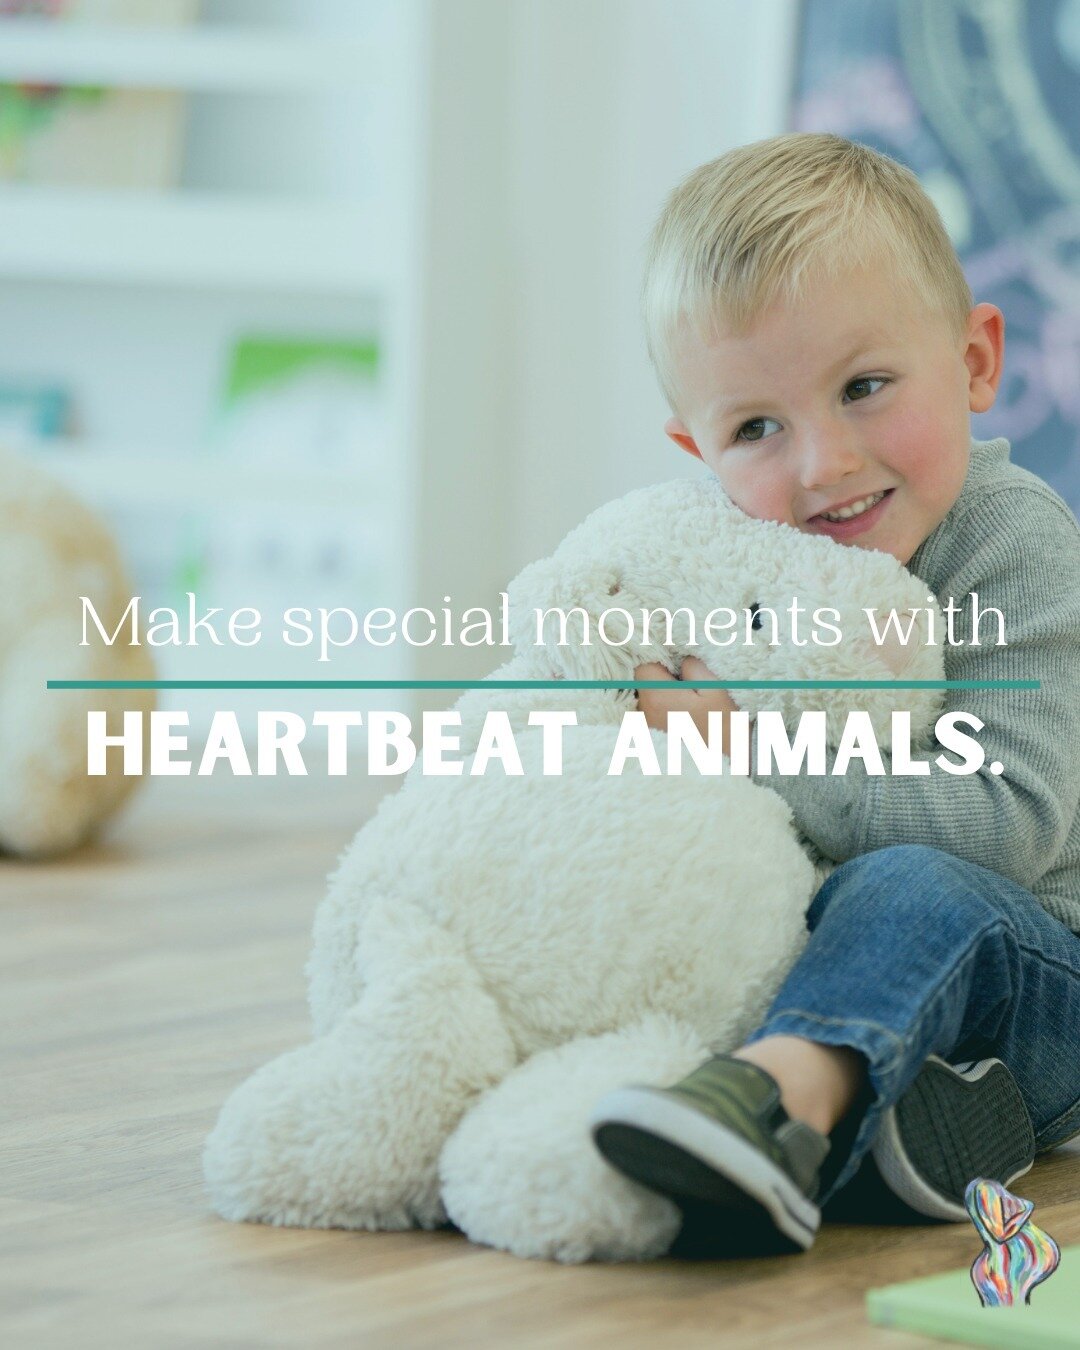 Every Life Meant to Live client receives a free heartbeat animal 🐰

Our clients find comfort in knowing that they'll get to replay the sound of their baby's heartbeat over and over again! 

For just a small donation, you can help create a precious m